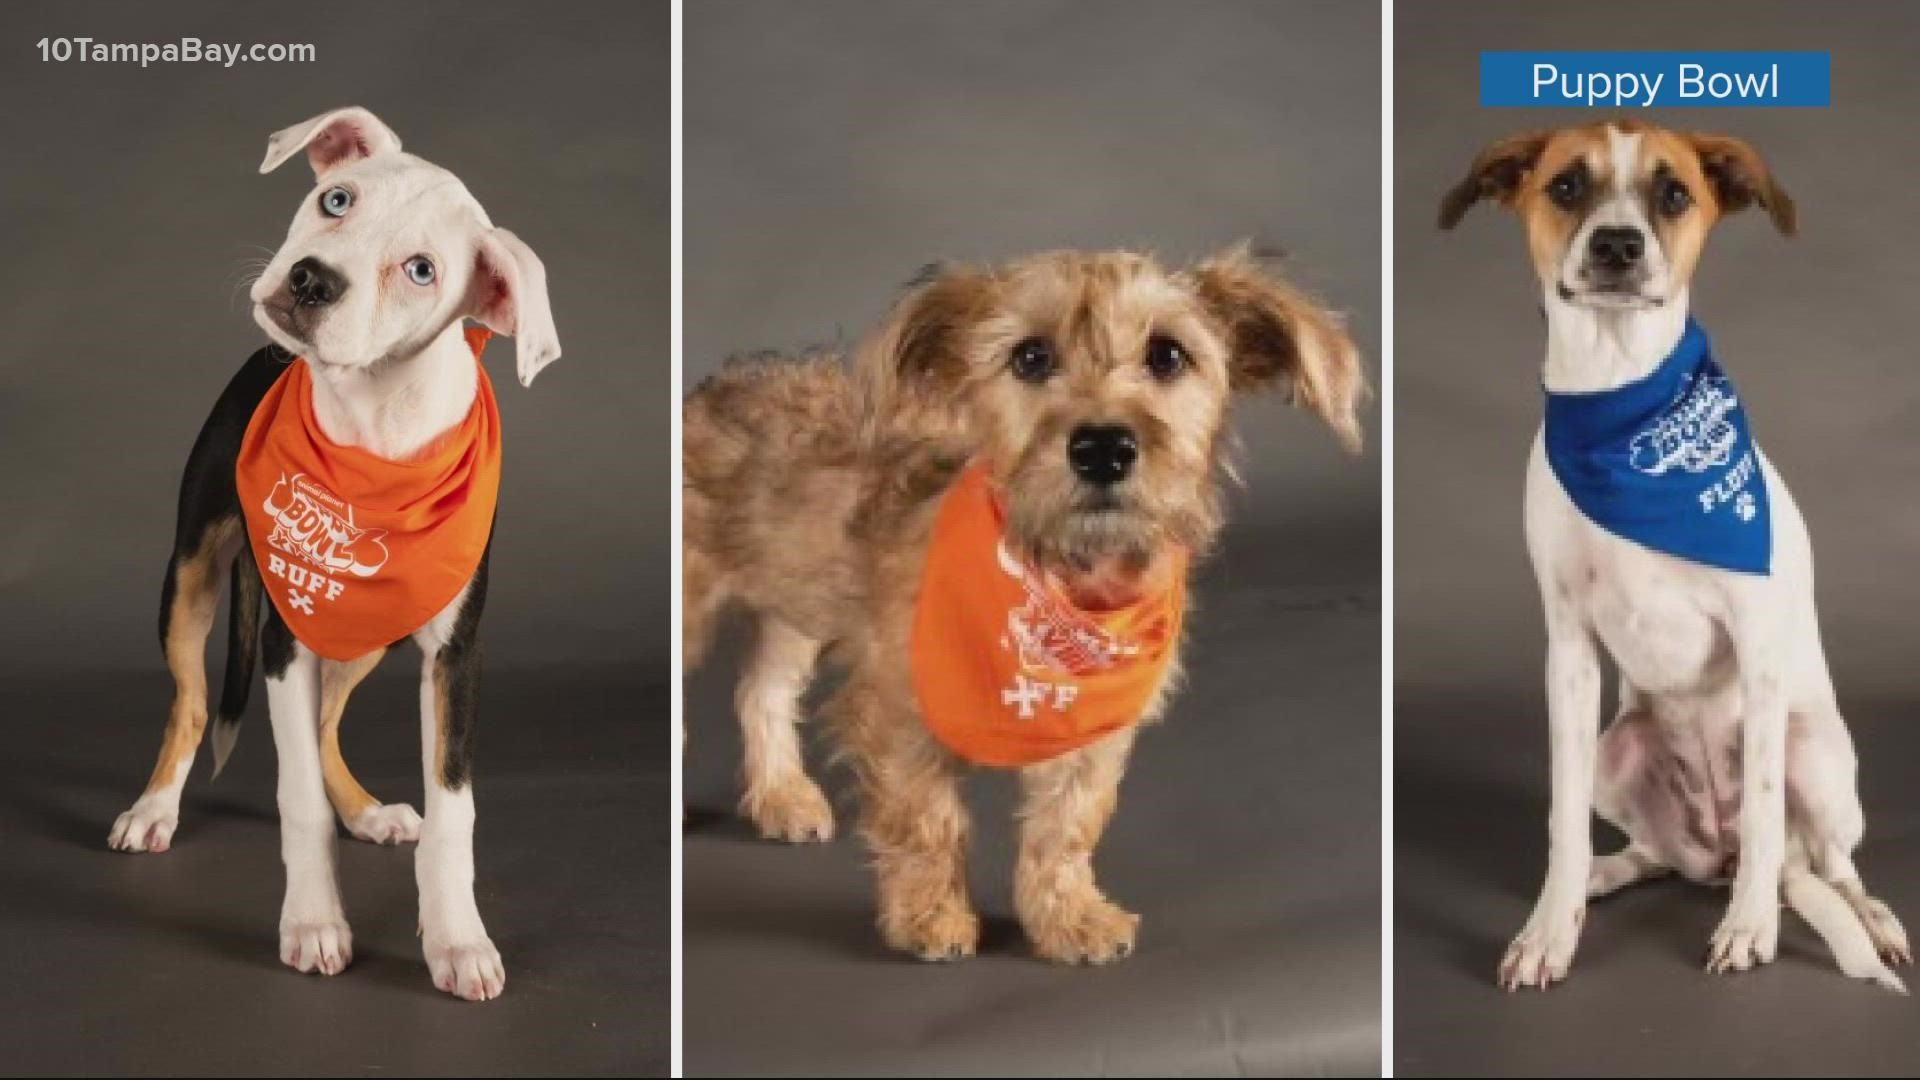 All three superstar athletes have found their fur-ever homes since pre-taping the game.